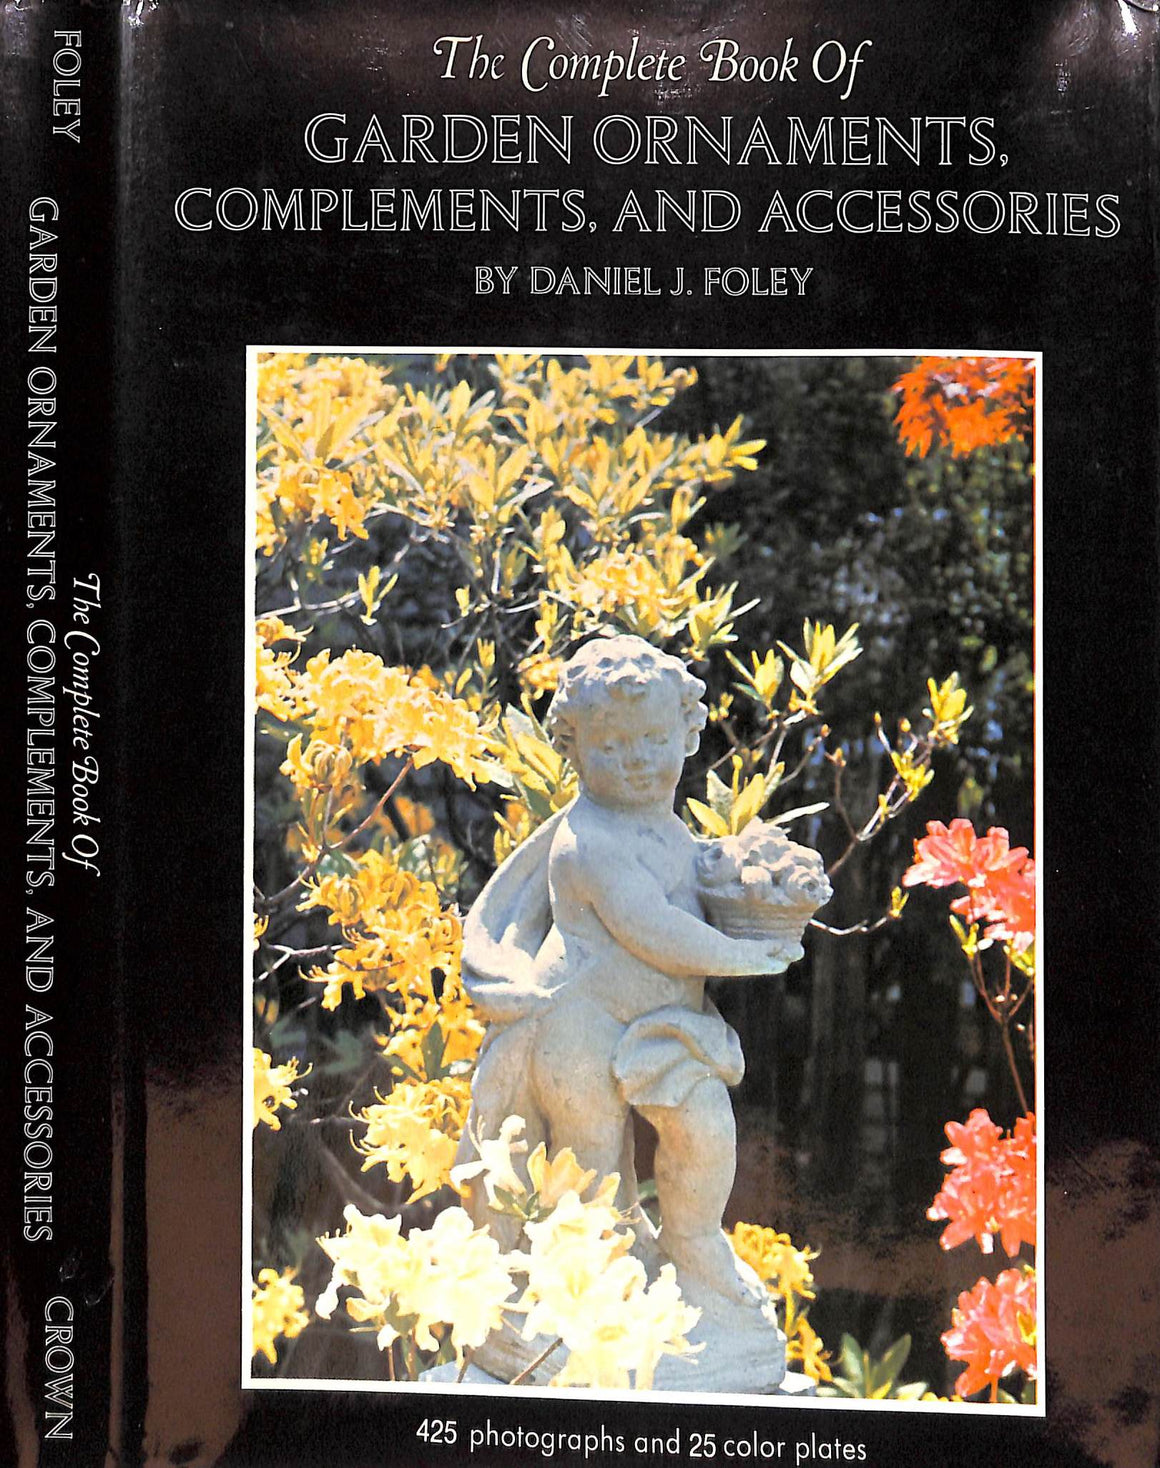 "The Complete Book Of Garden Ornaments, Complements, And Accessories" 1972 FOLEY, Daniel J.